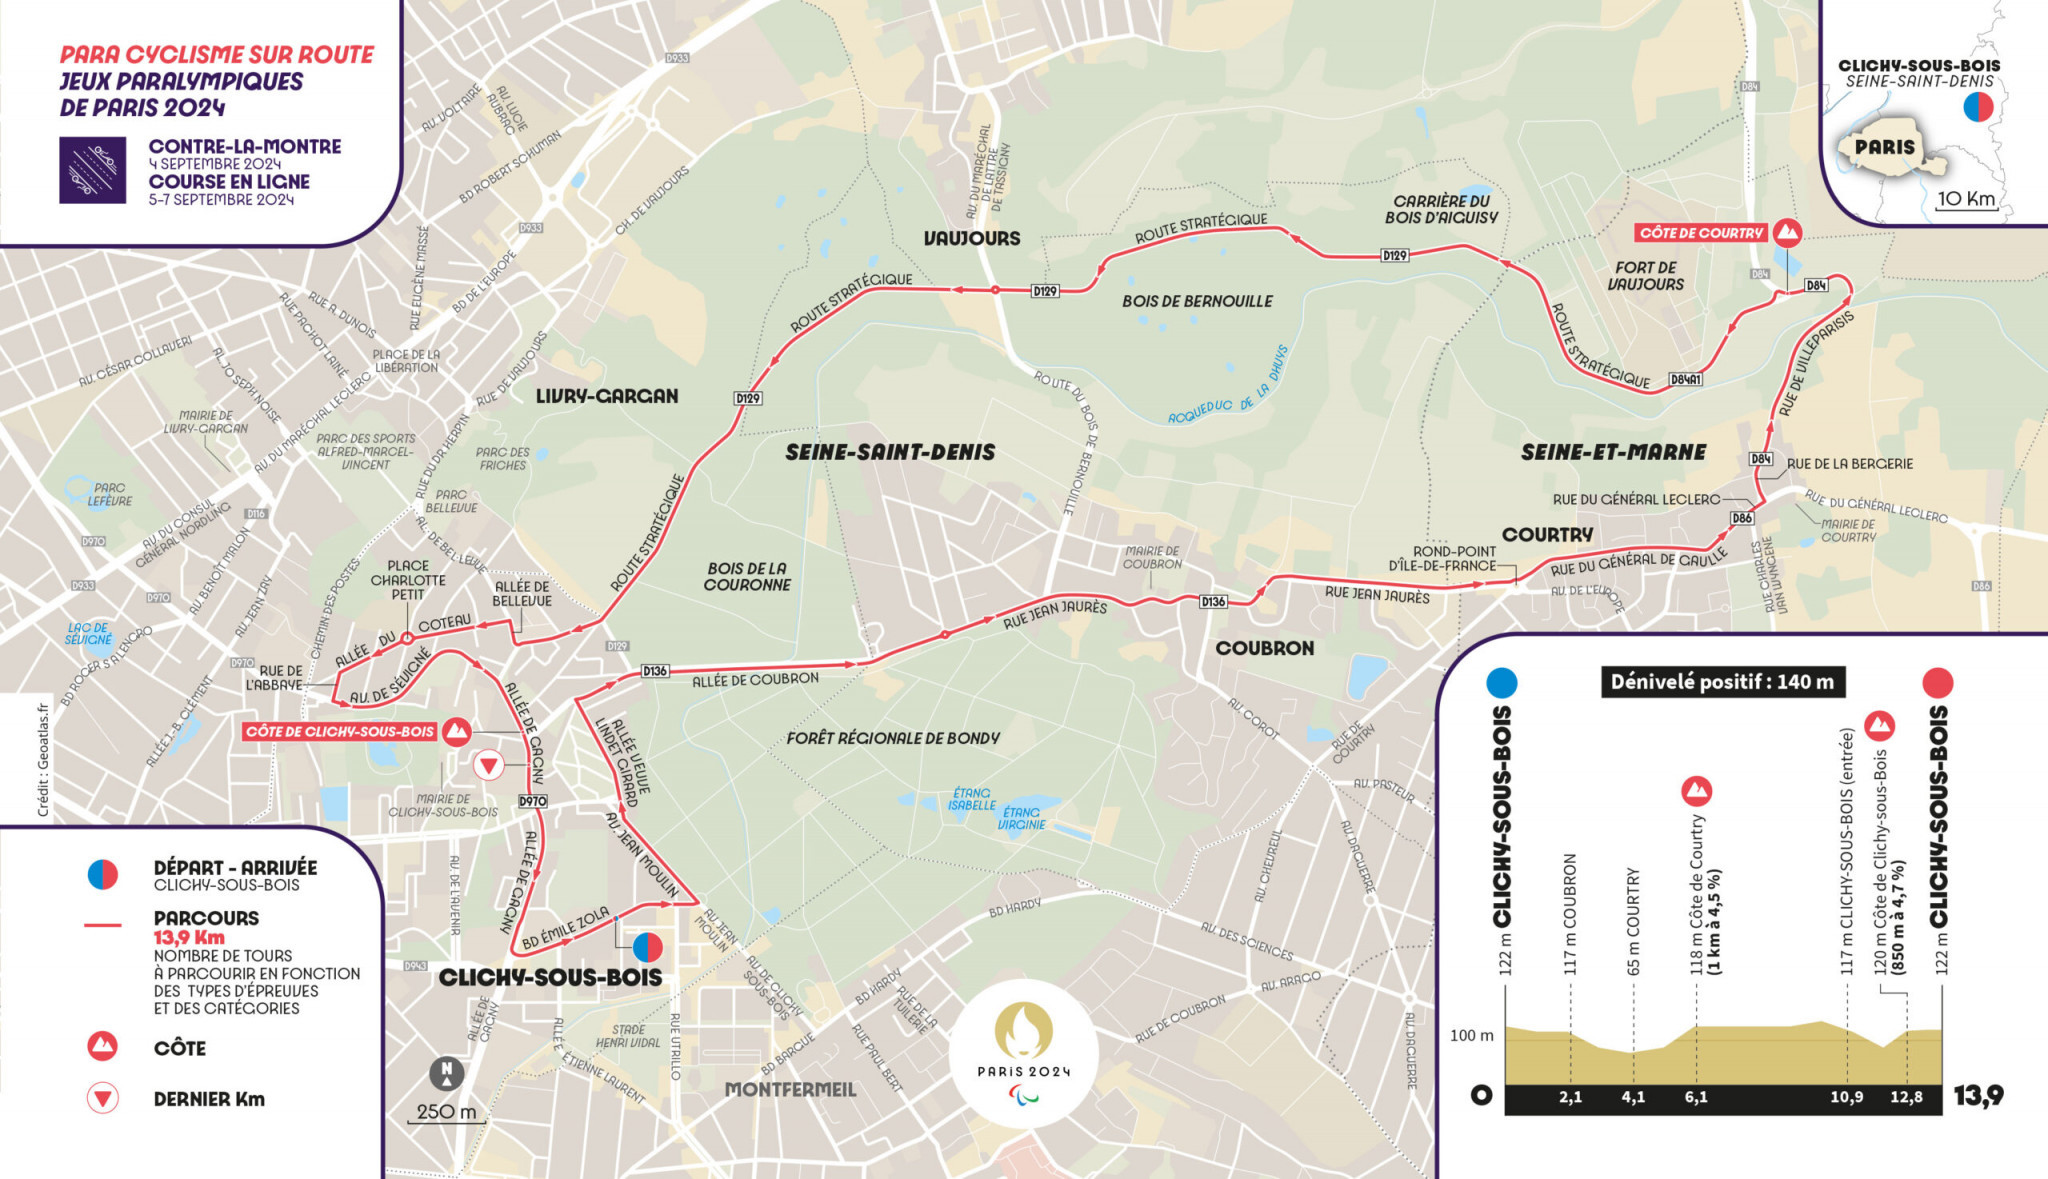 The cycling route starts and ends at Clichy-Sous-Bois ©Paris 2024